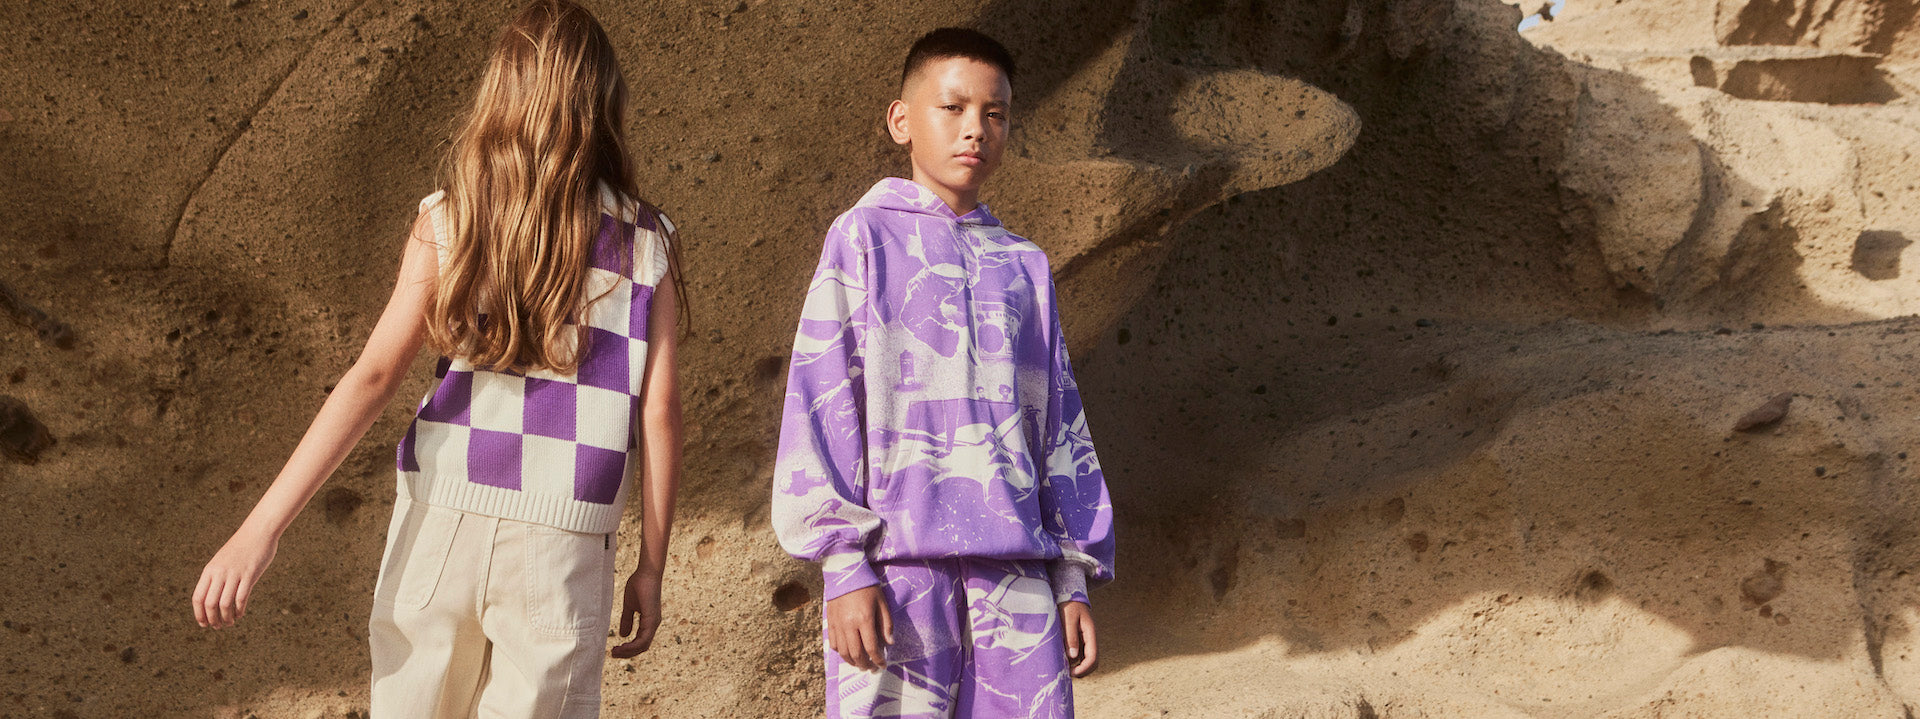 boy and girl wearing molo from kids atelier posing in desert promoting end of season sale 